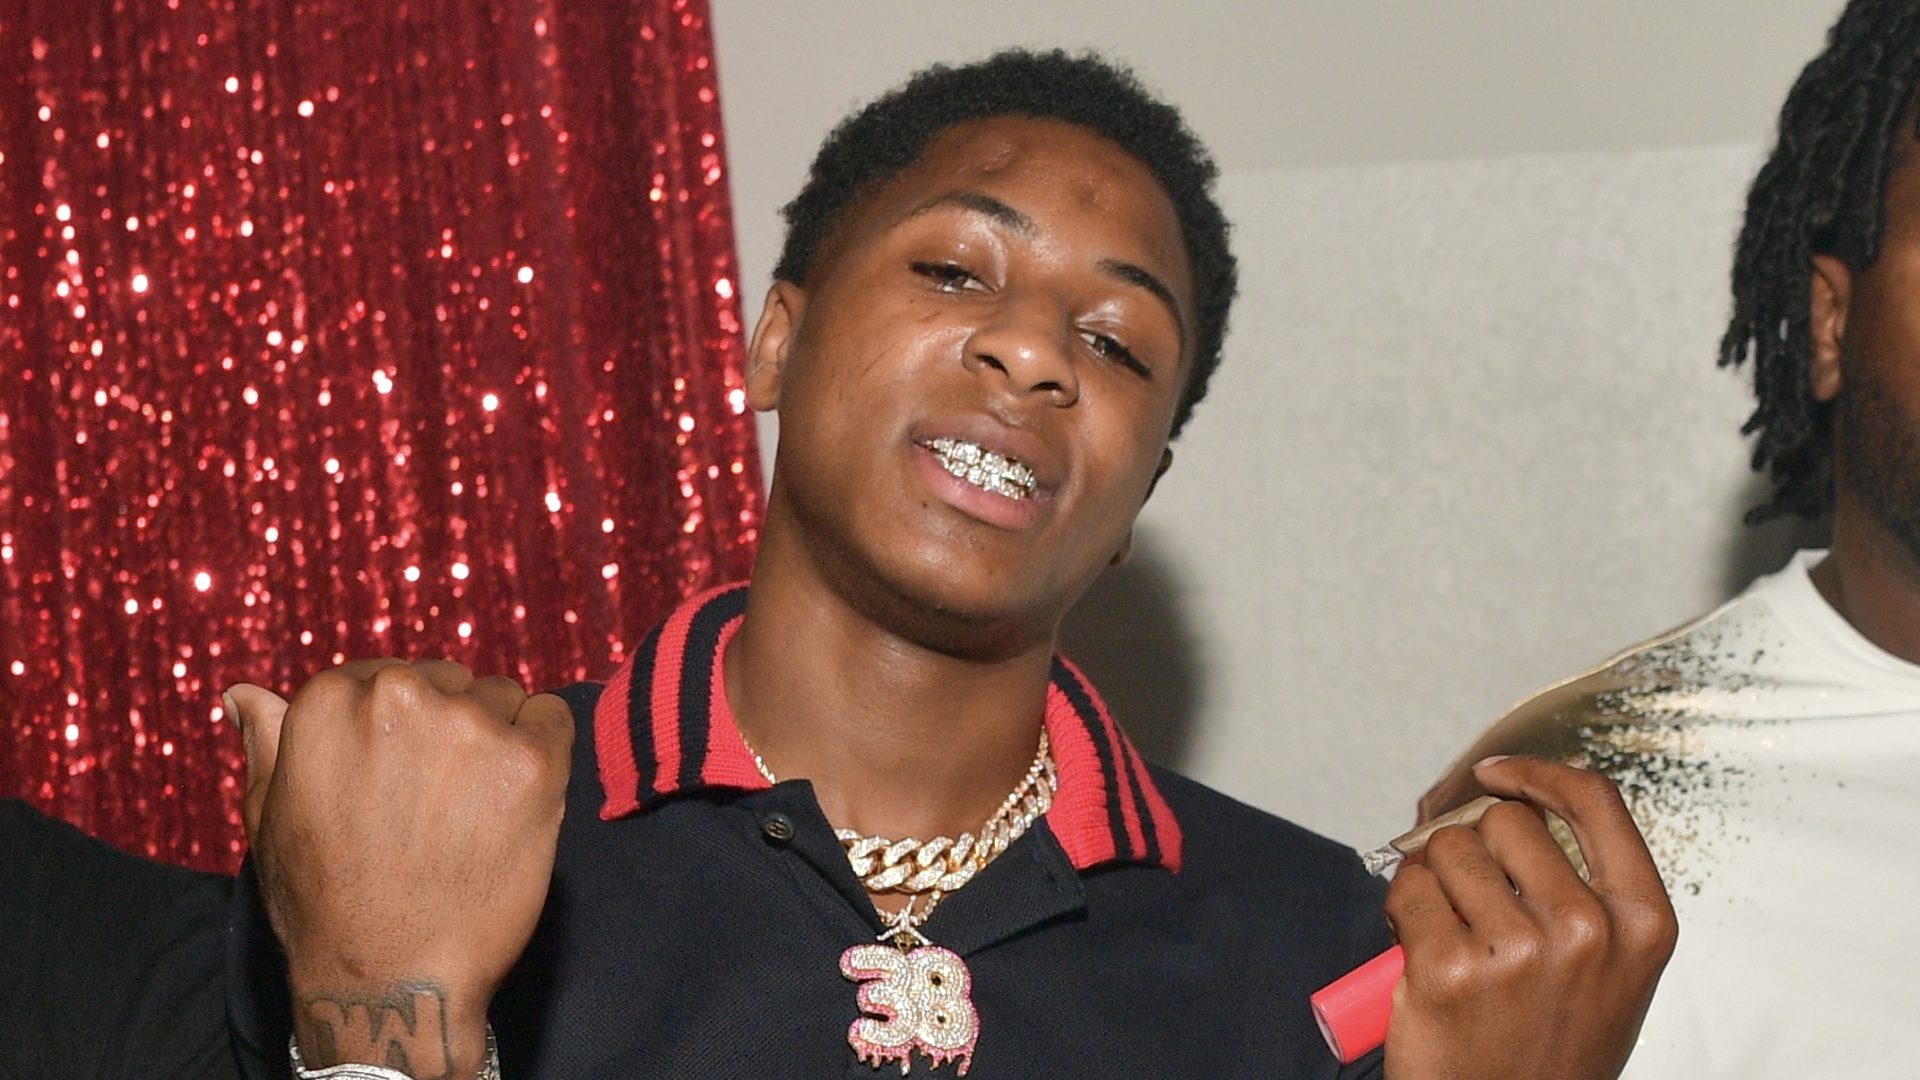 Come Again Social Media Reacts After NBA Youngboy Says Hes 22Not Really Big22 On Fatherhood Video scaled